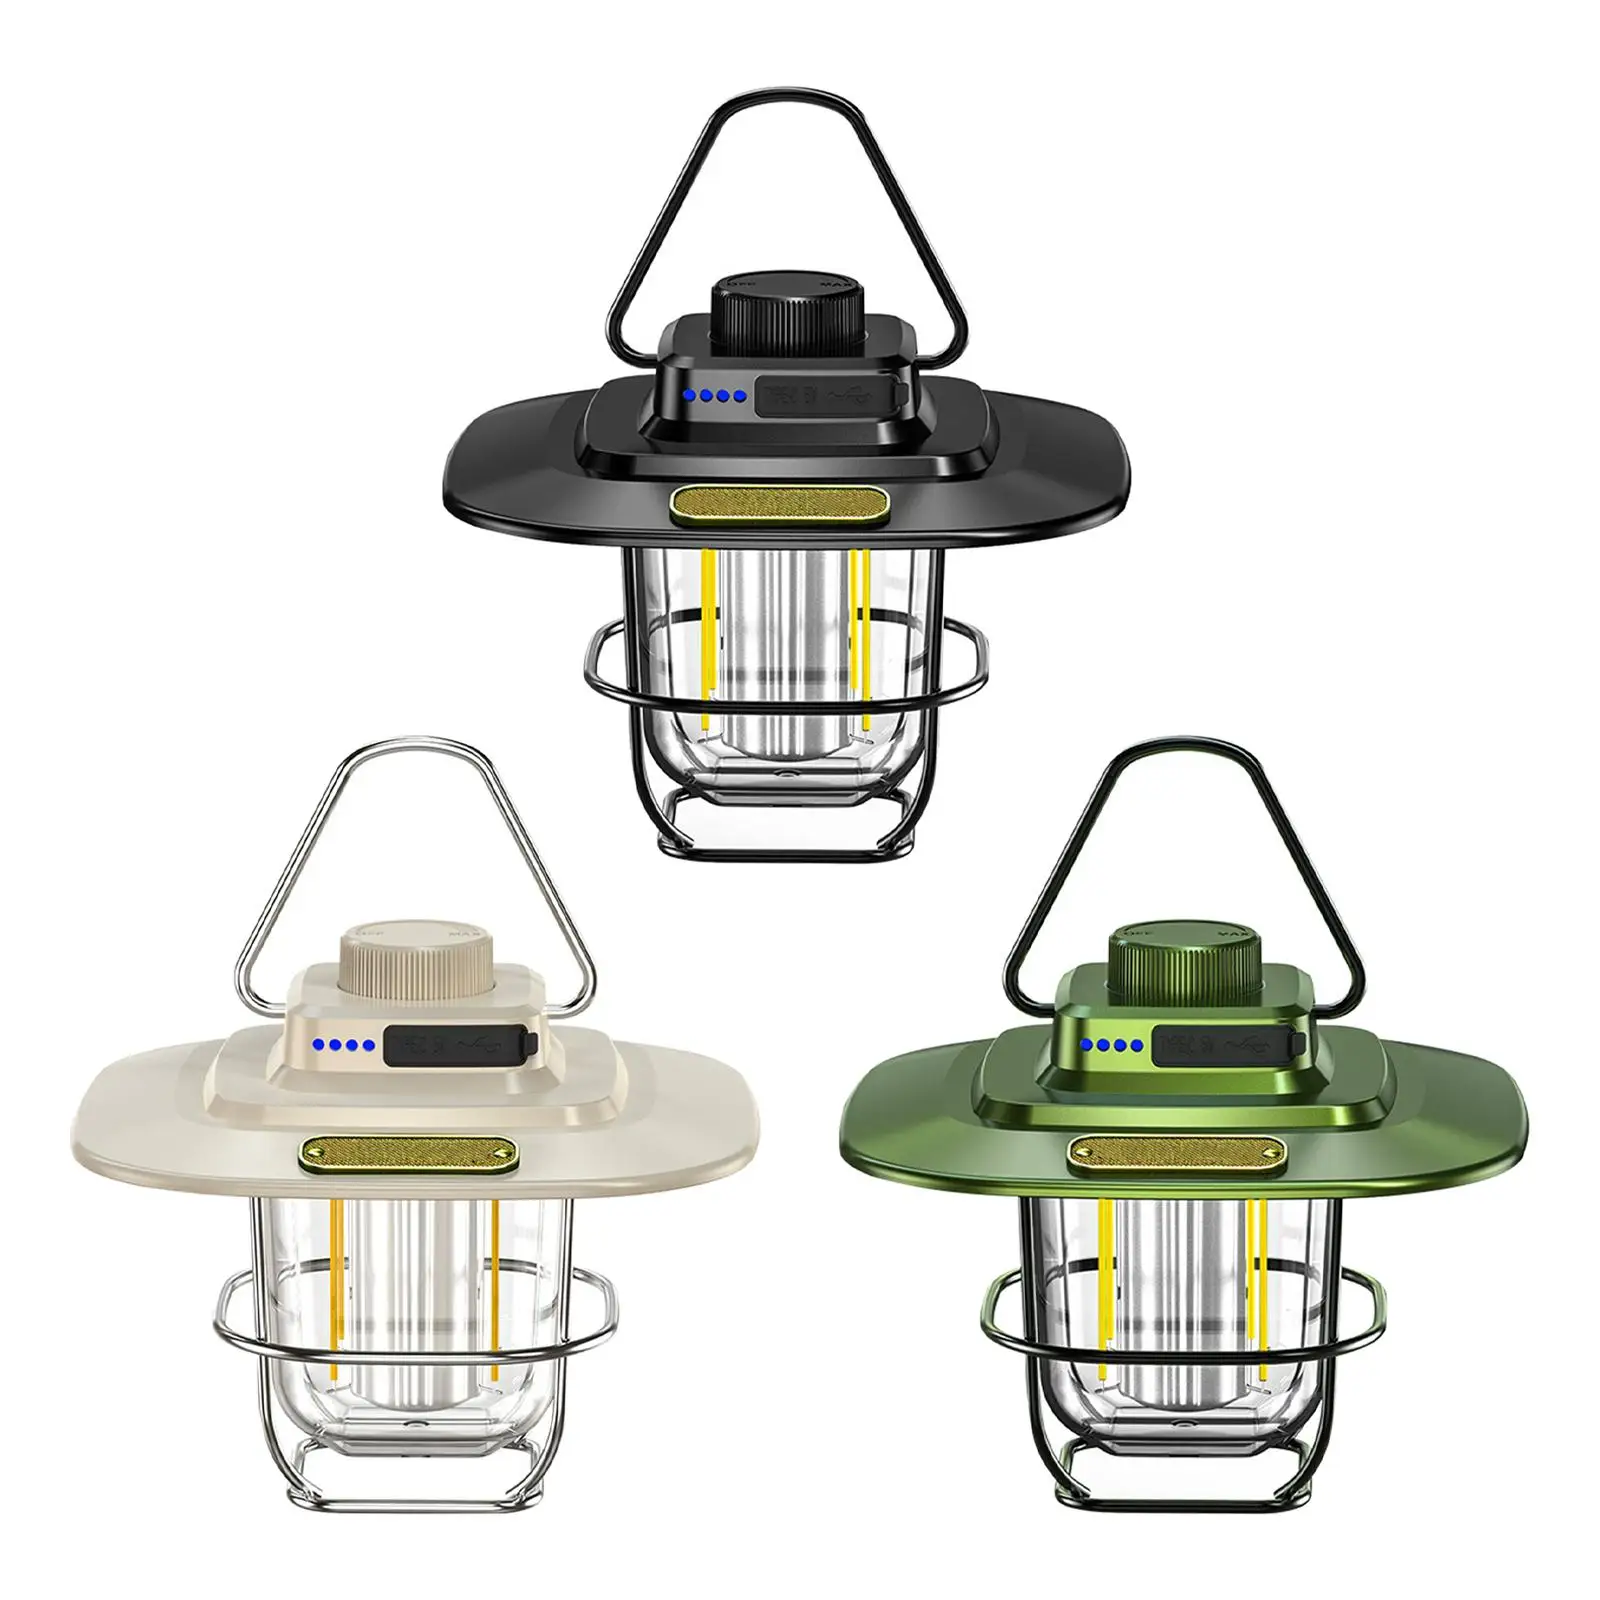 Stainless Steel LED Camping Lantern Night Lamp Tent Light Waterproof Lightweight Vintage Style Rechargeable for Hiking Garden